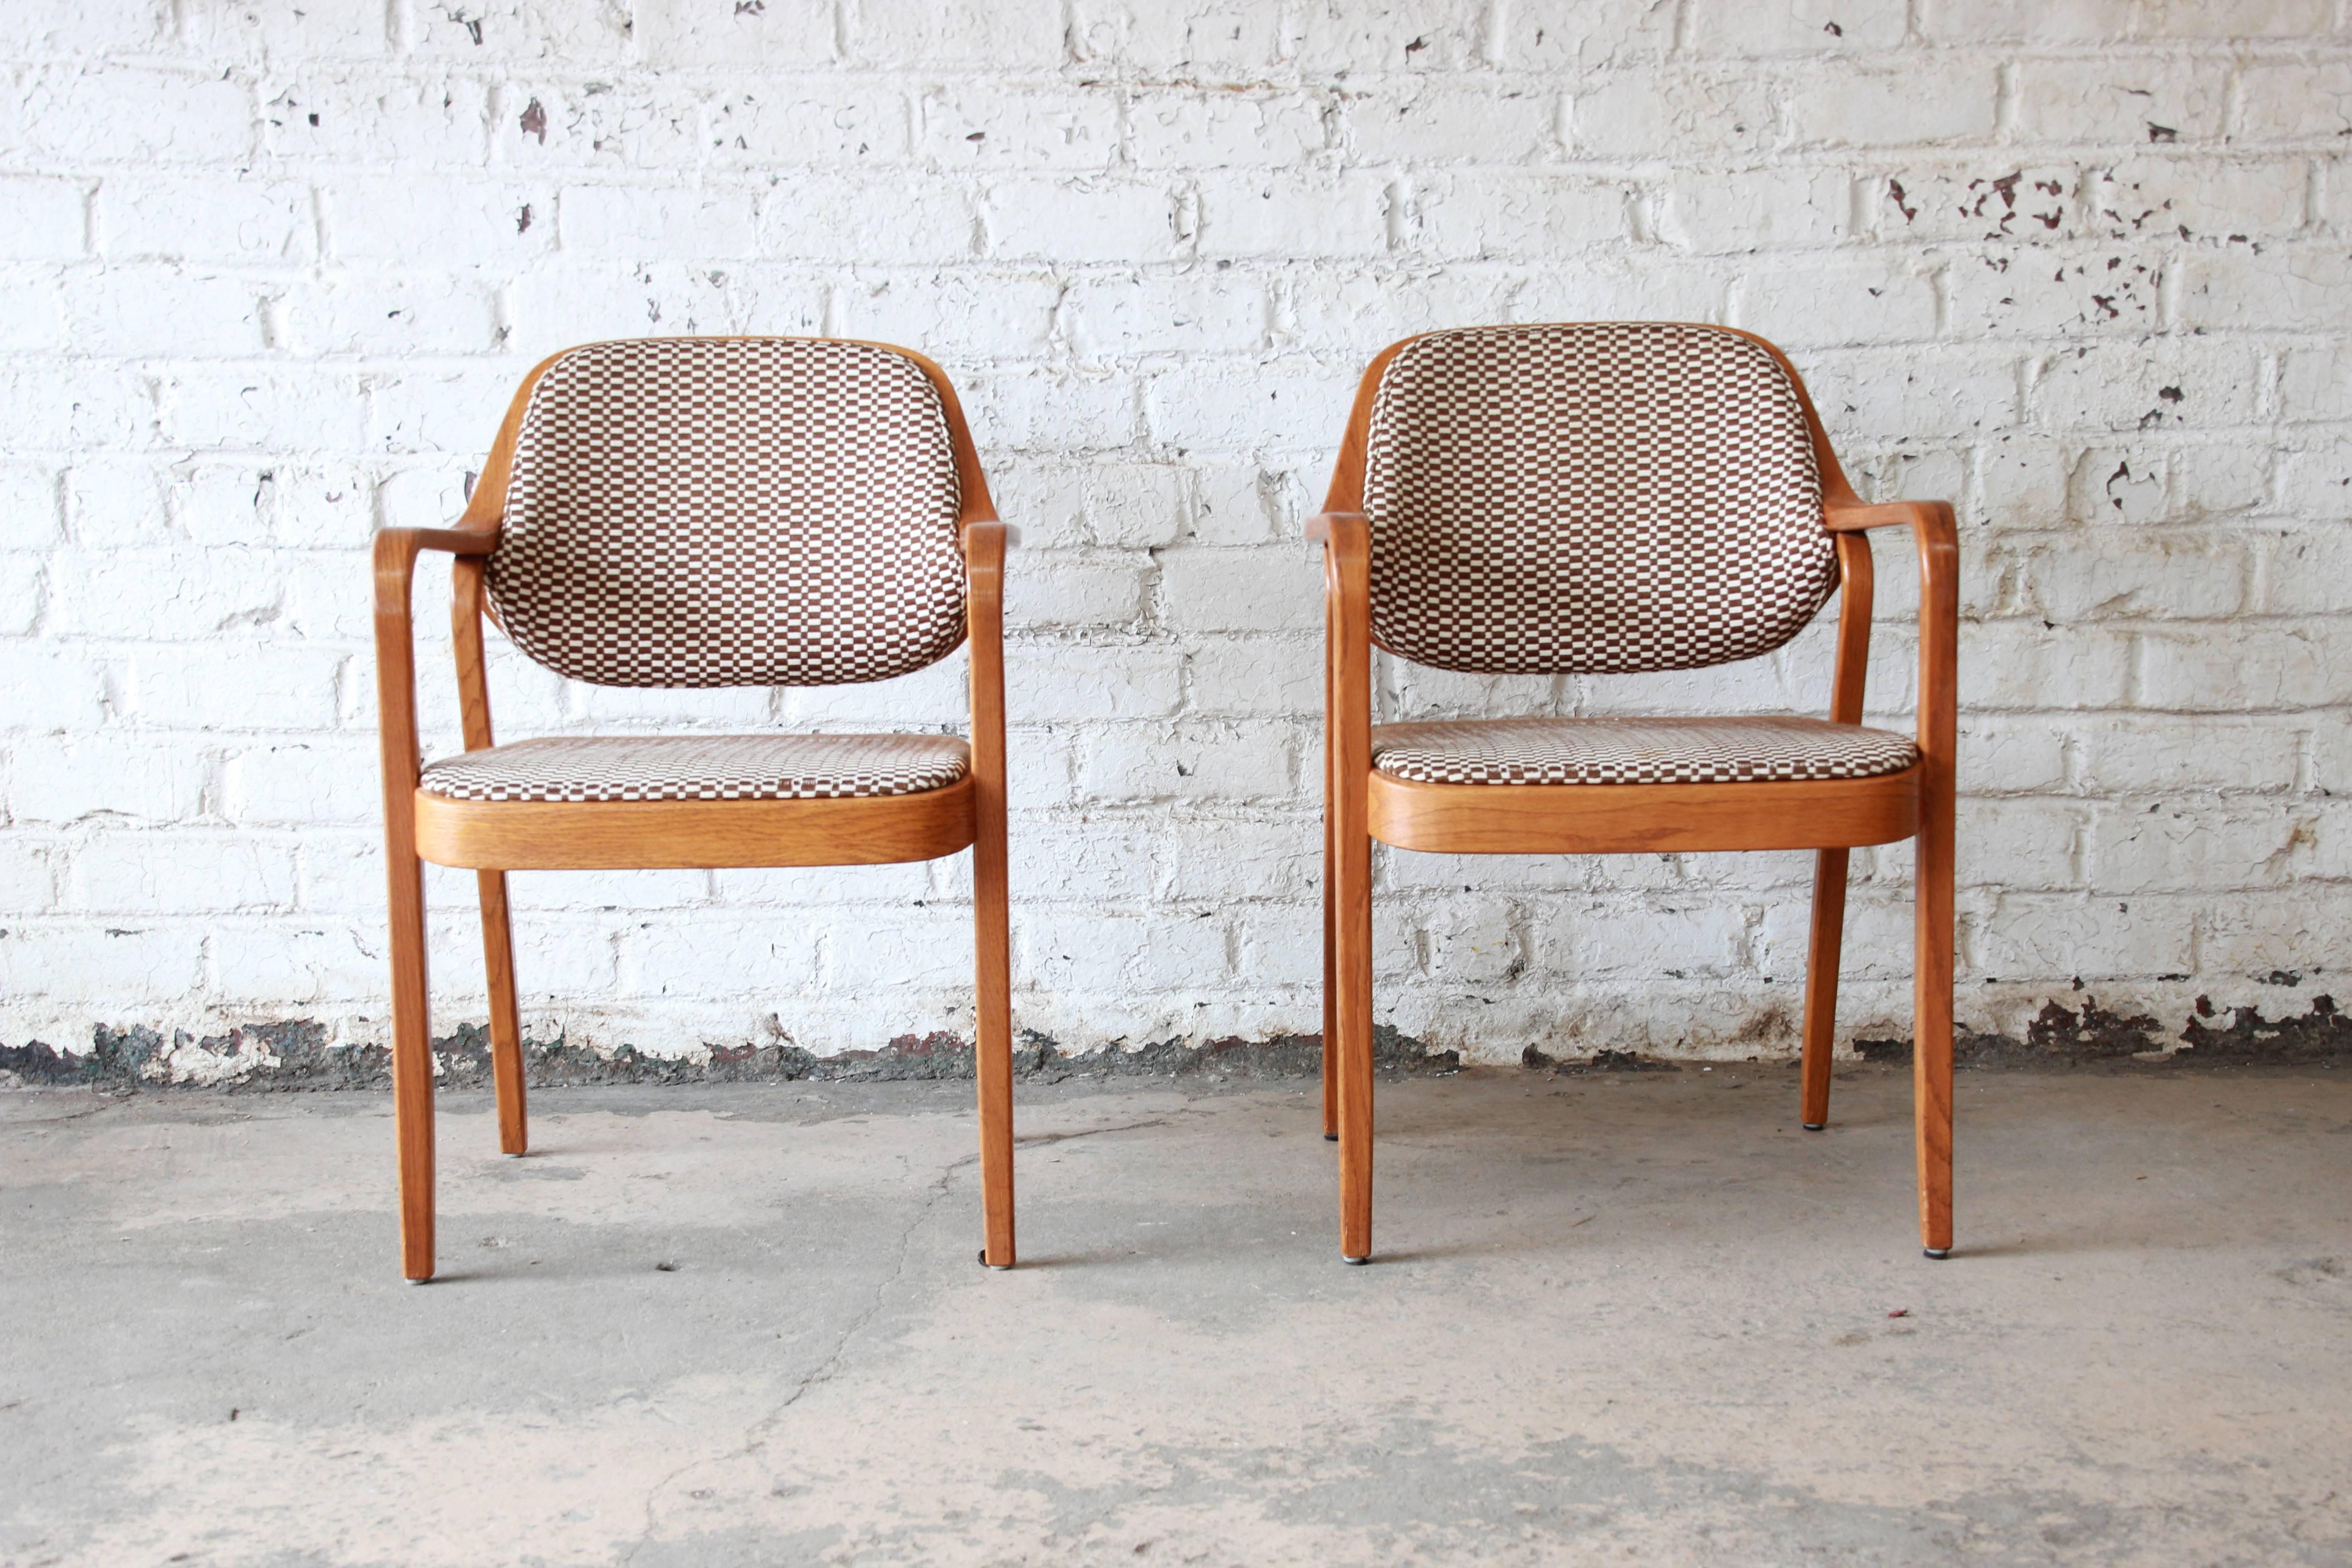 A sleek and stylish pair of Mid-Century Modern bentwood oak framed armchairs designed by Don Pettit for Knoll International. The chairs feature a solid oak frame with unique bentwood design and original brown and ivory checkered upholstery. The